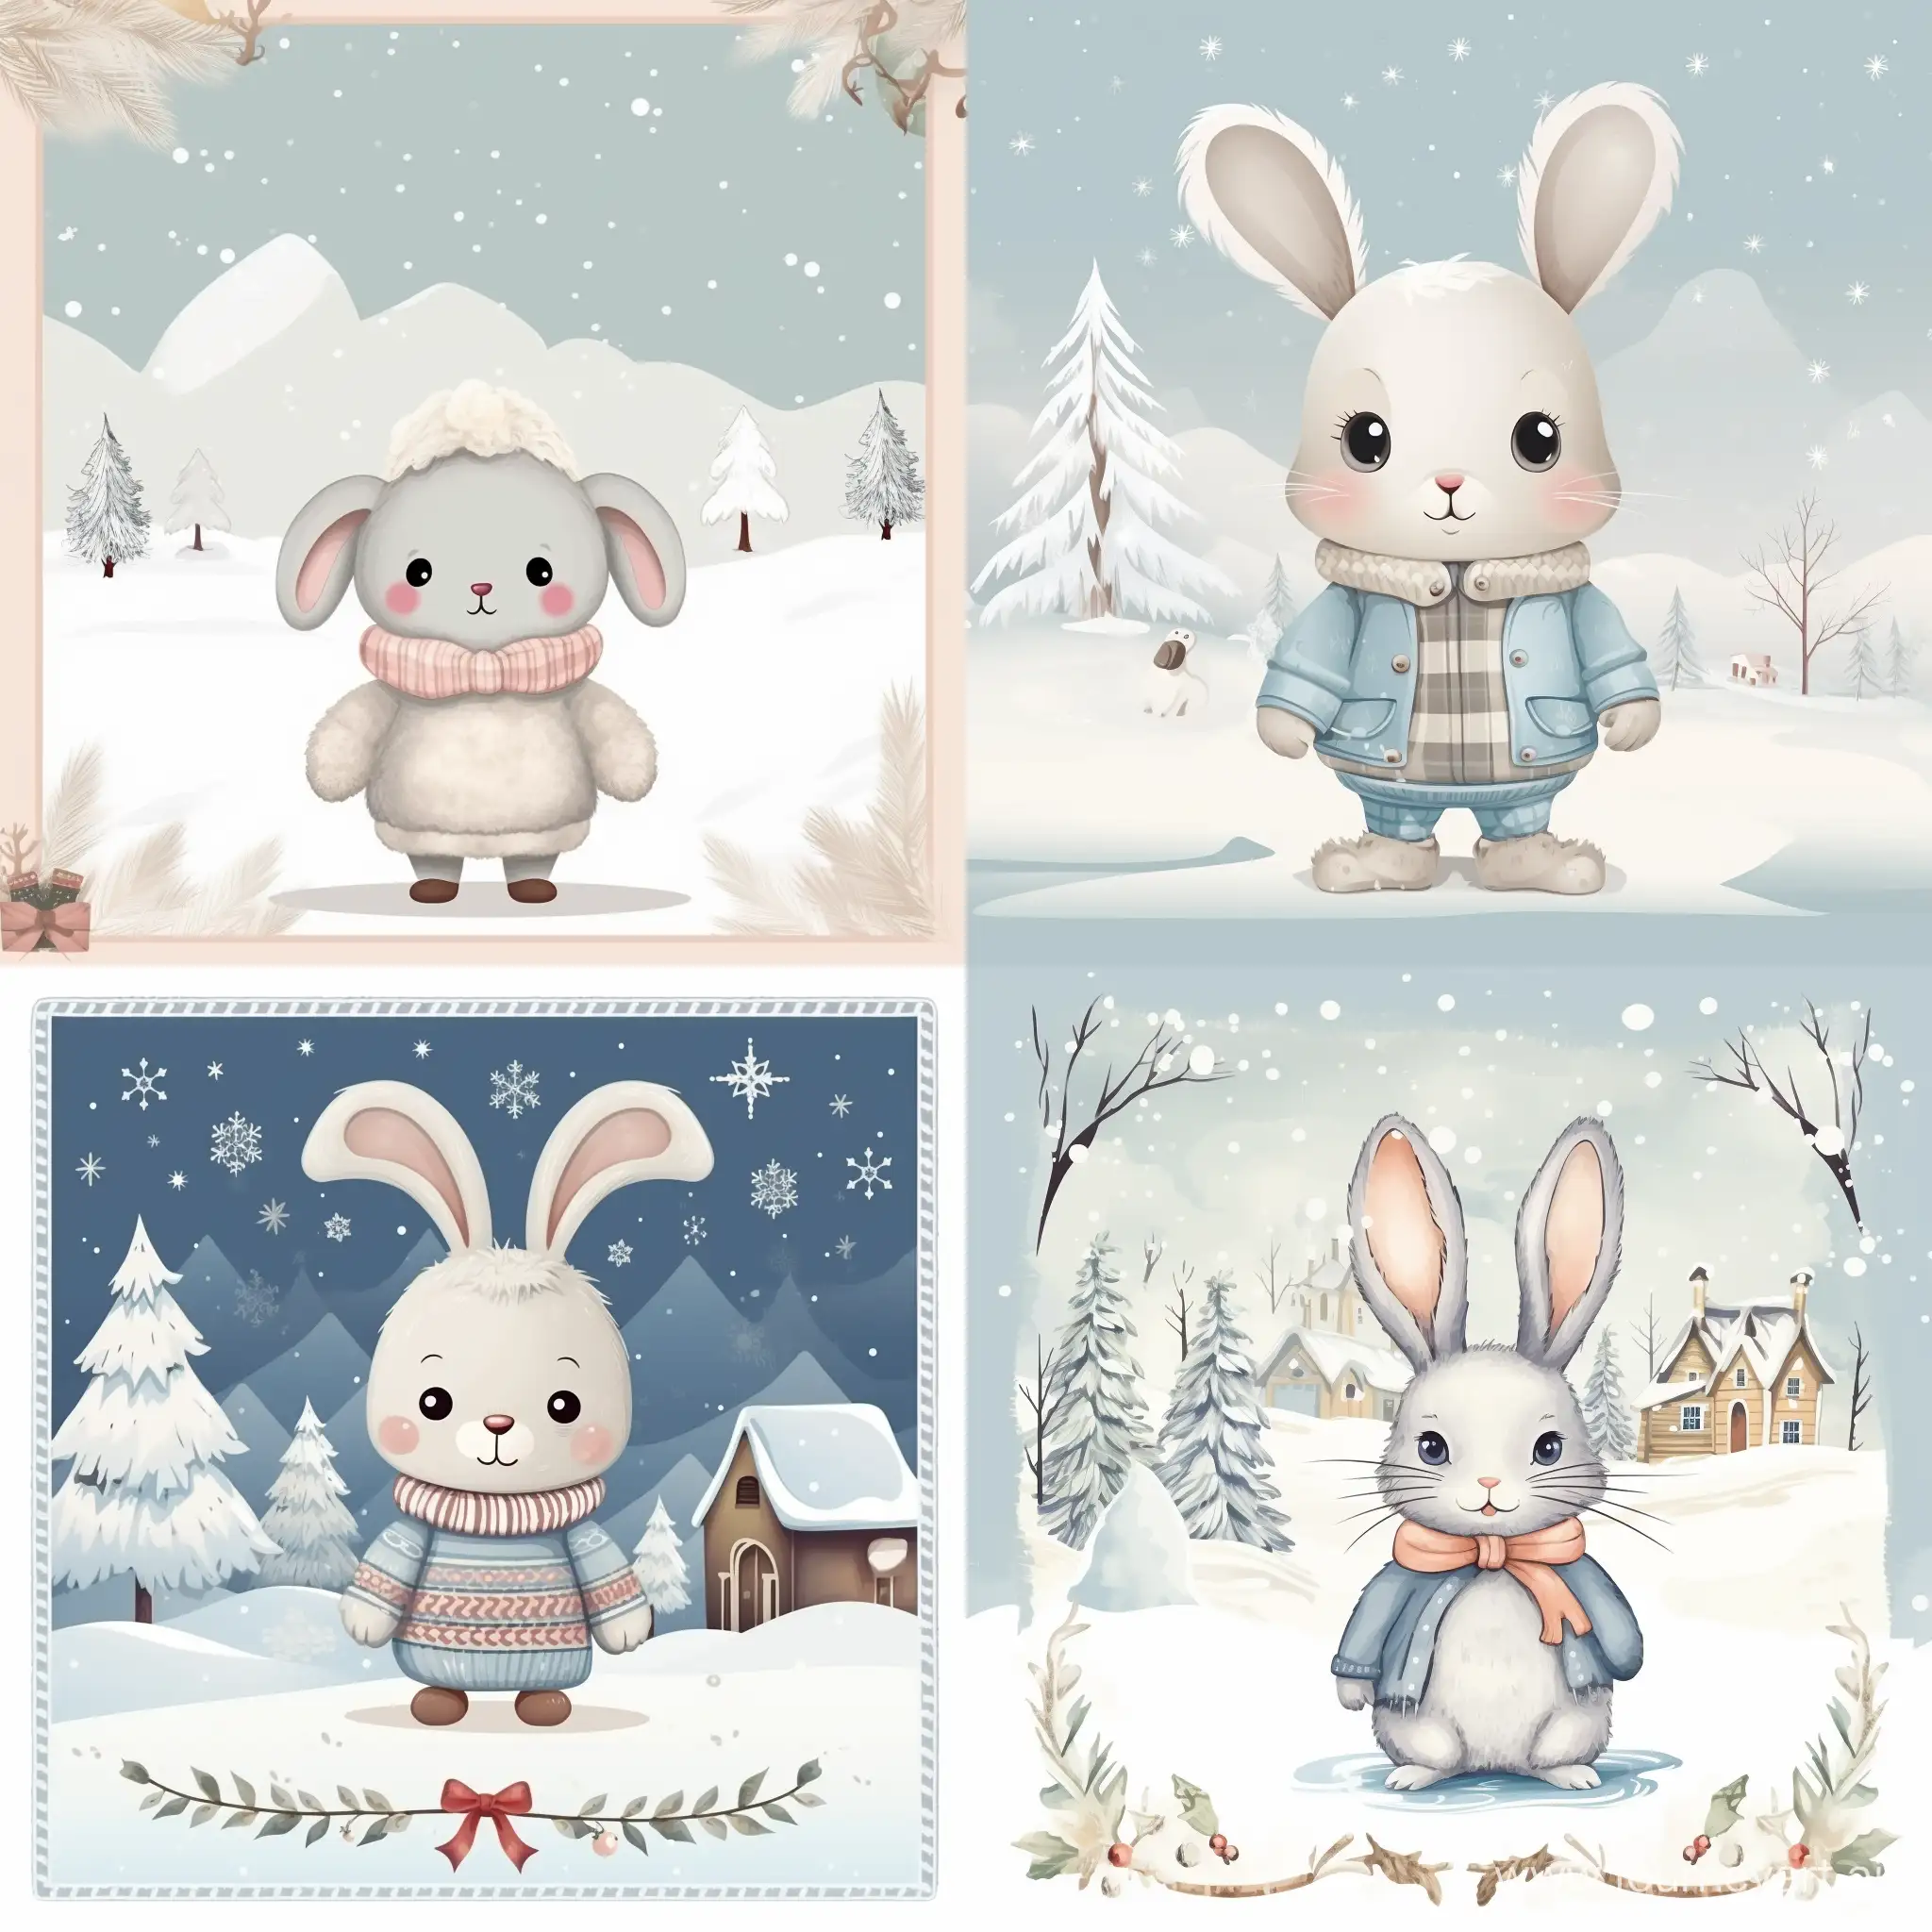 Charming-Vintage-Christmas-Card-Featuring-a-Cartoon-Bunny-on-a-Winter-Background